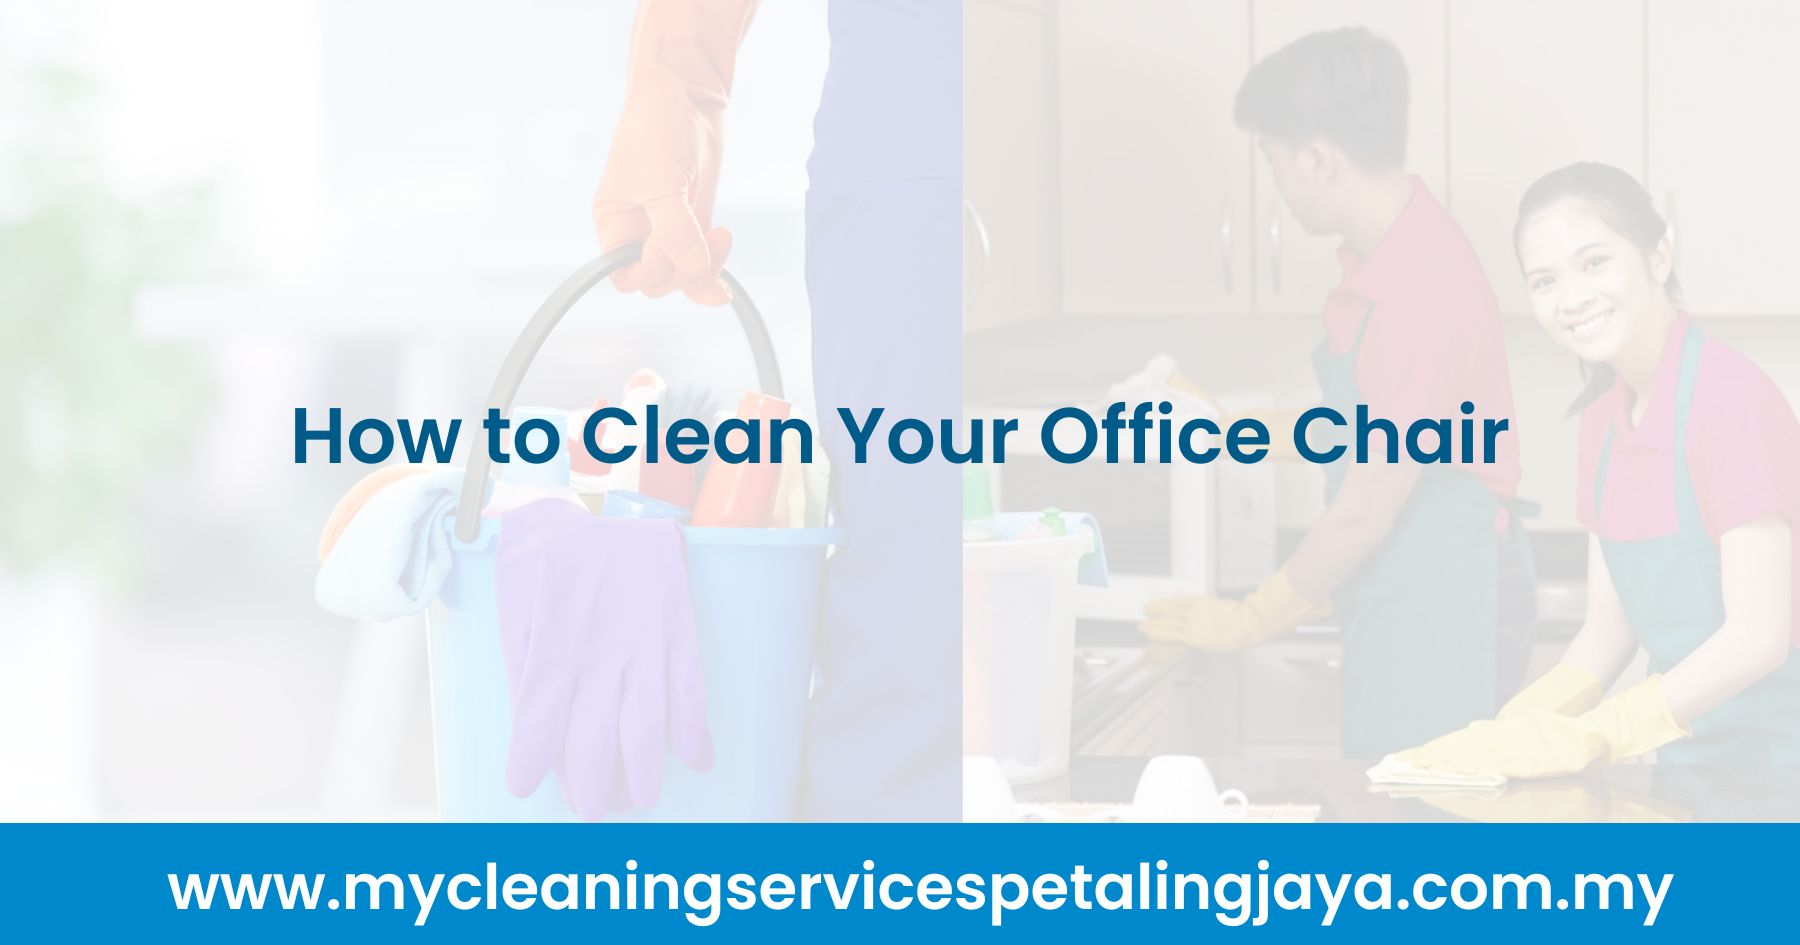 How to Clean Your Office Chair